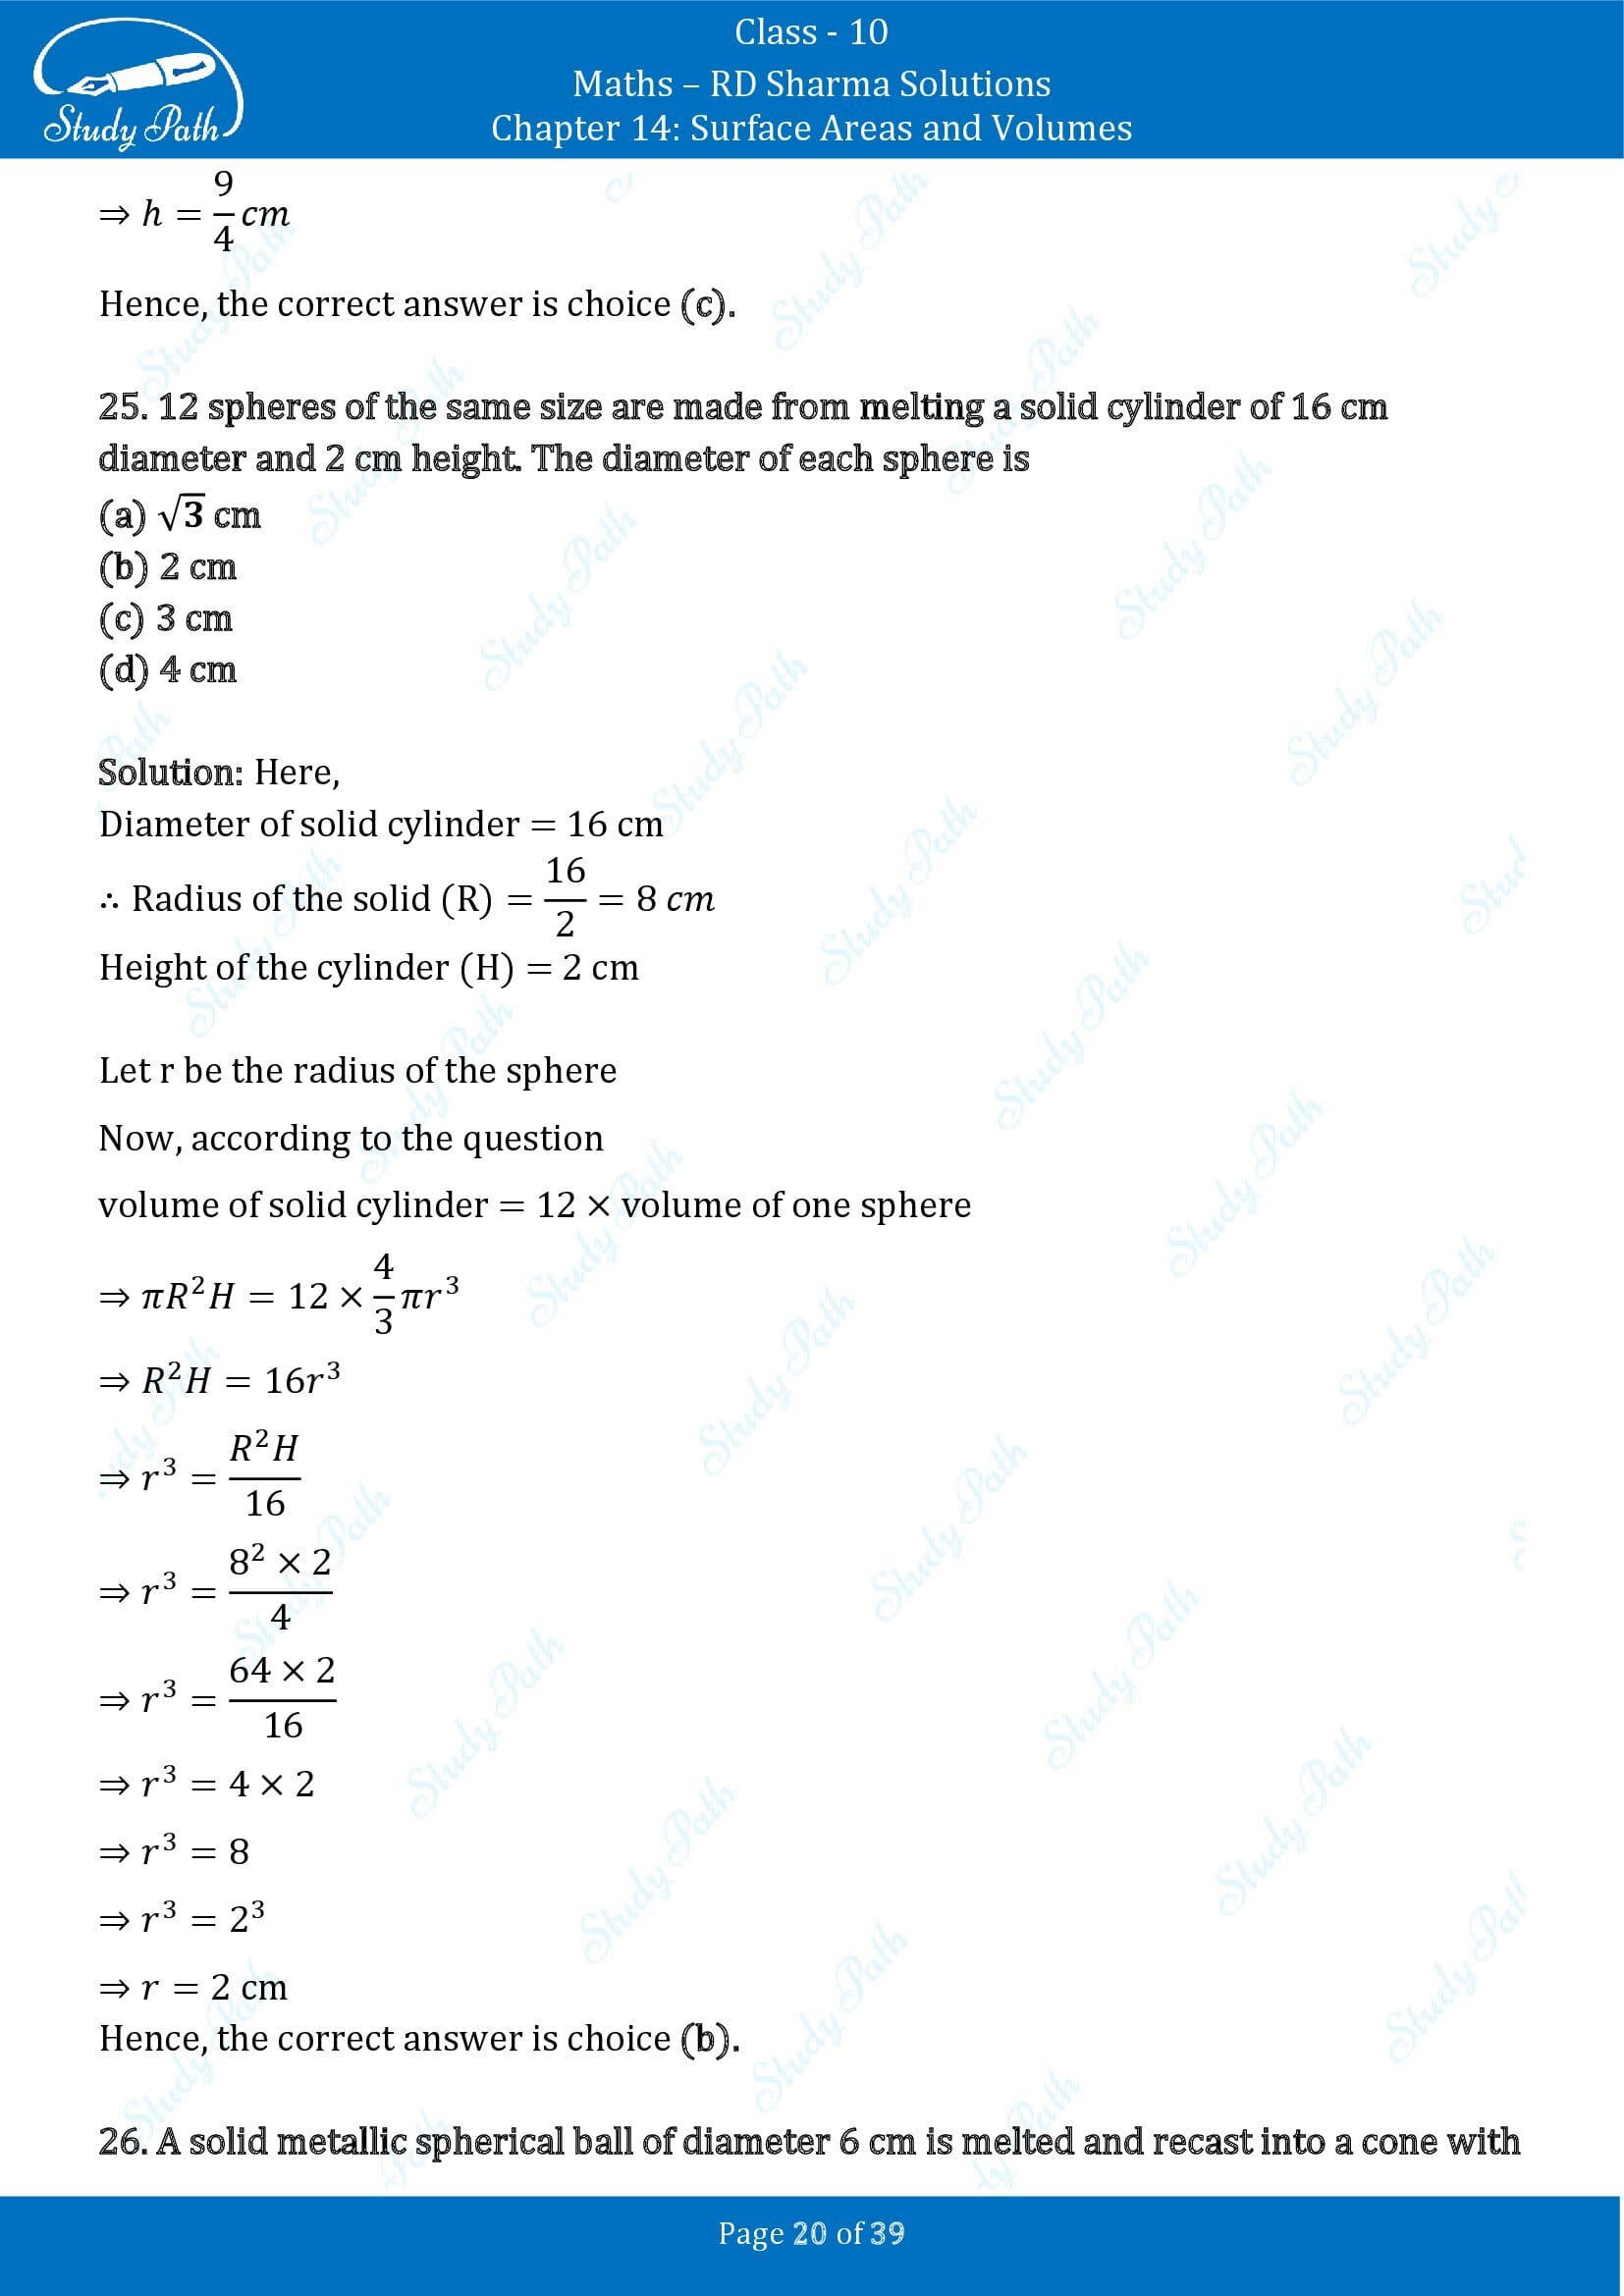 RD Sharma Solutions Class 10 Chapter 14 Surface Areas and Volumes Multiple Choice Question MCQs 00020